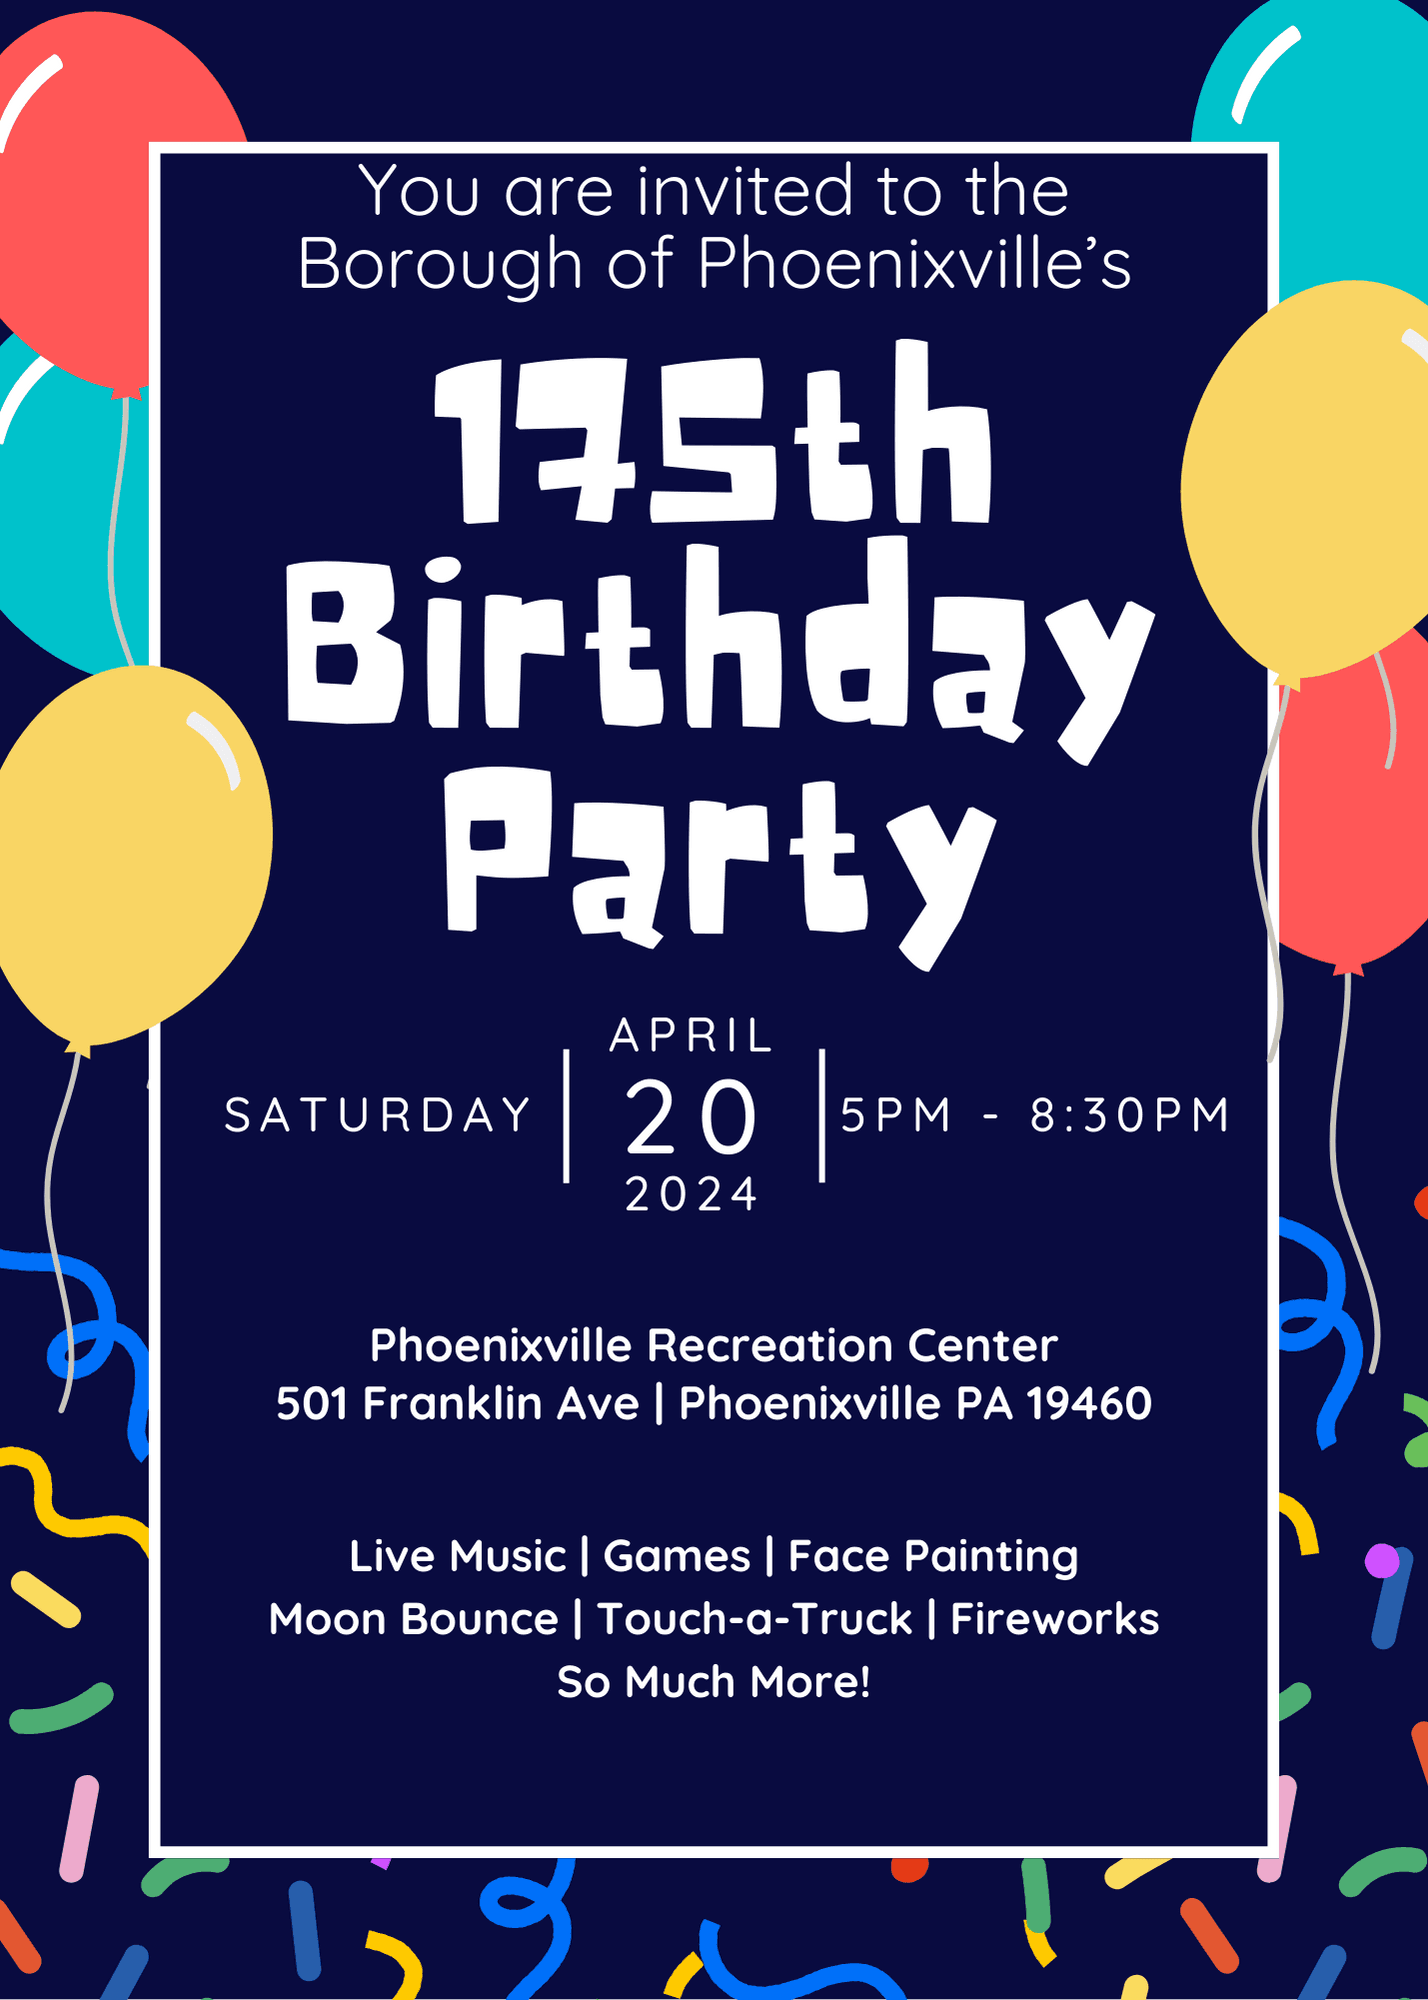 Flyer for Borough of Phoenixville's 175 Birthday Party